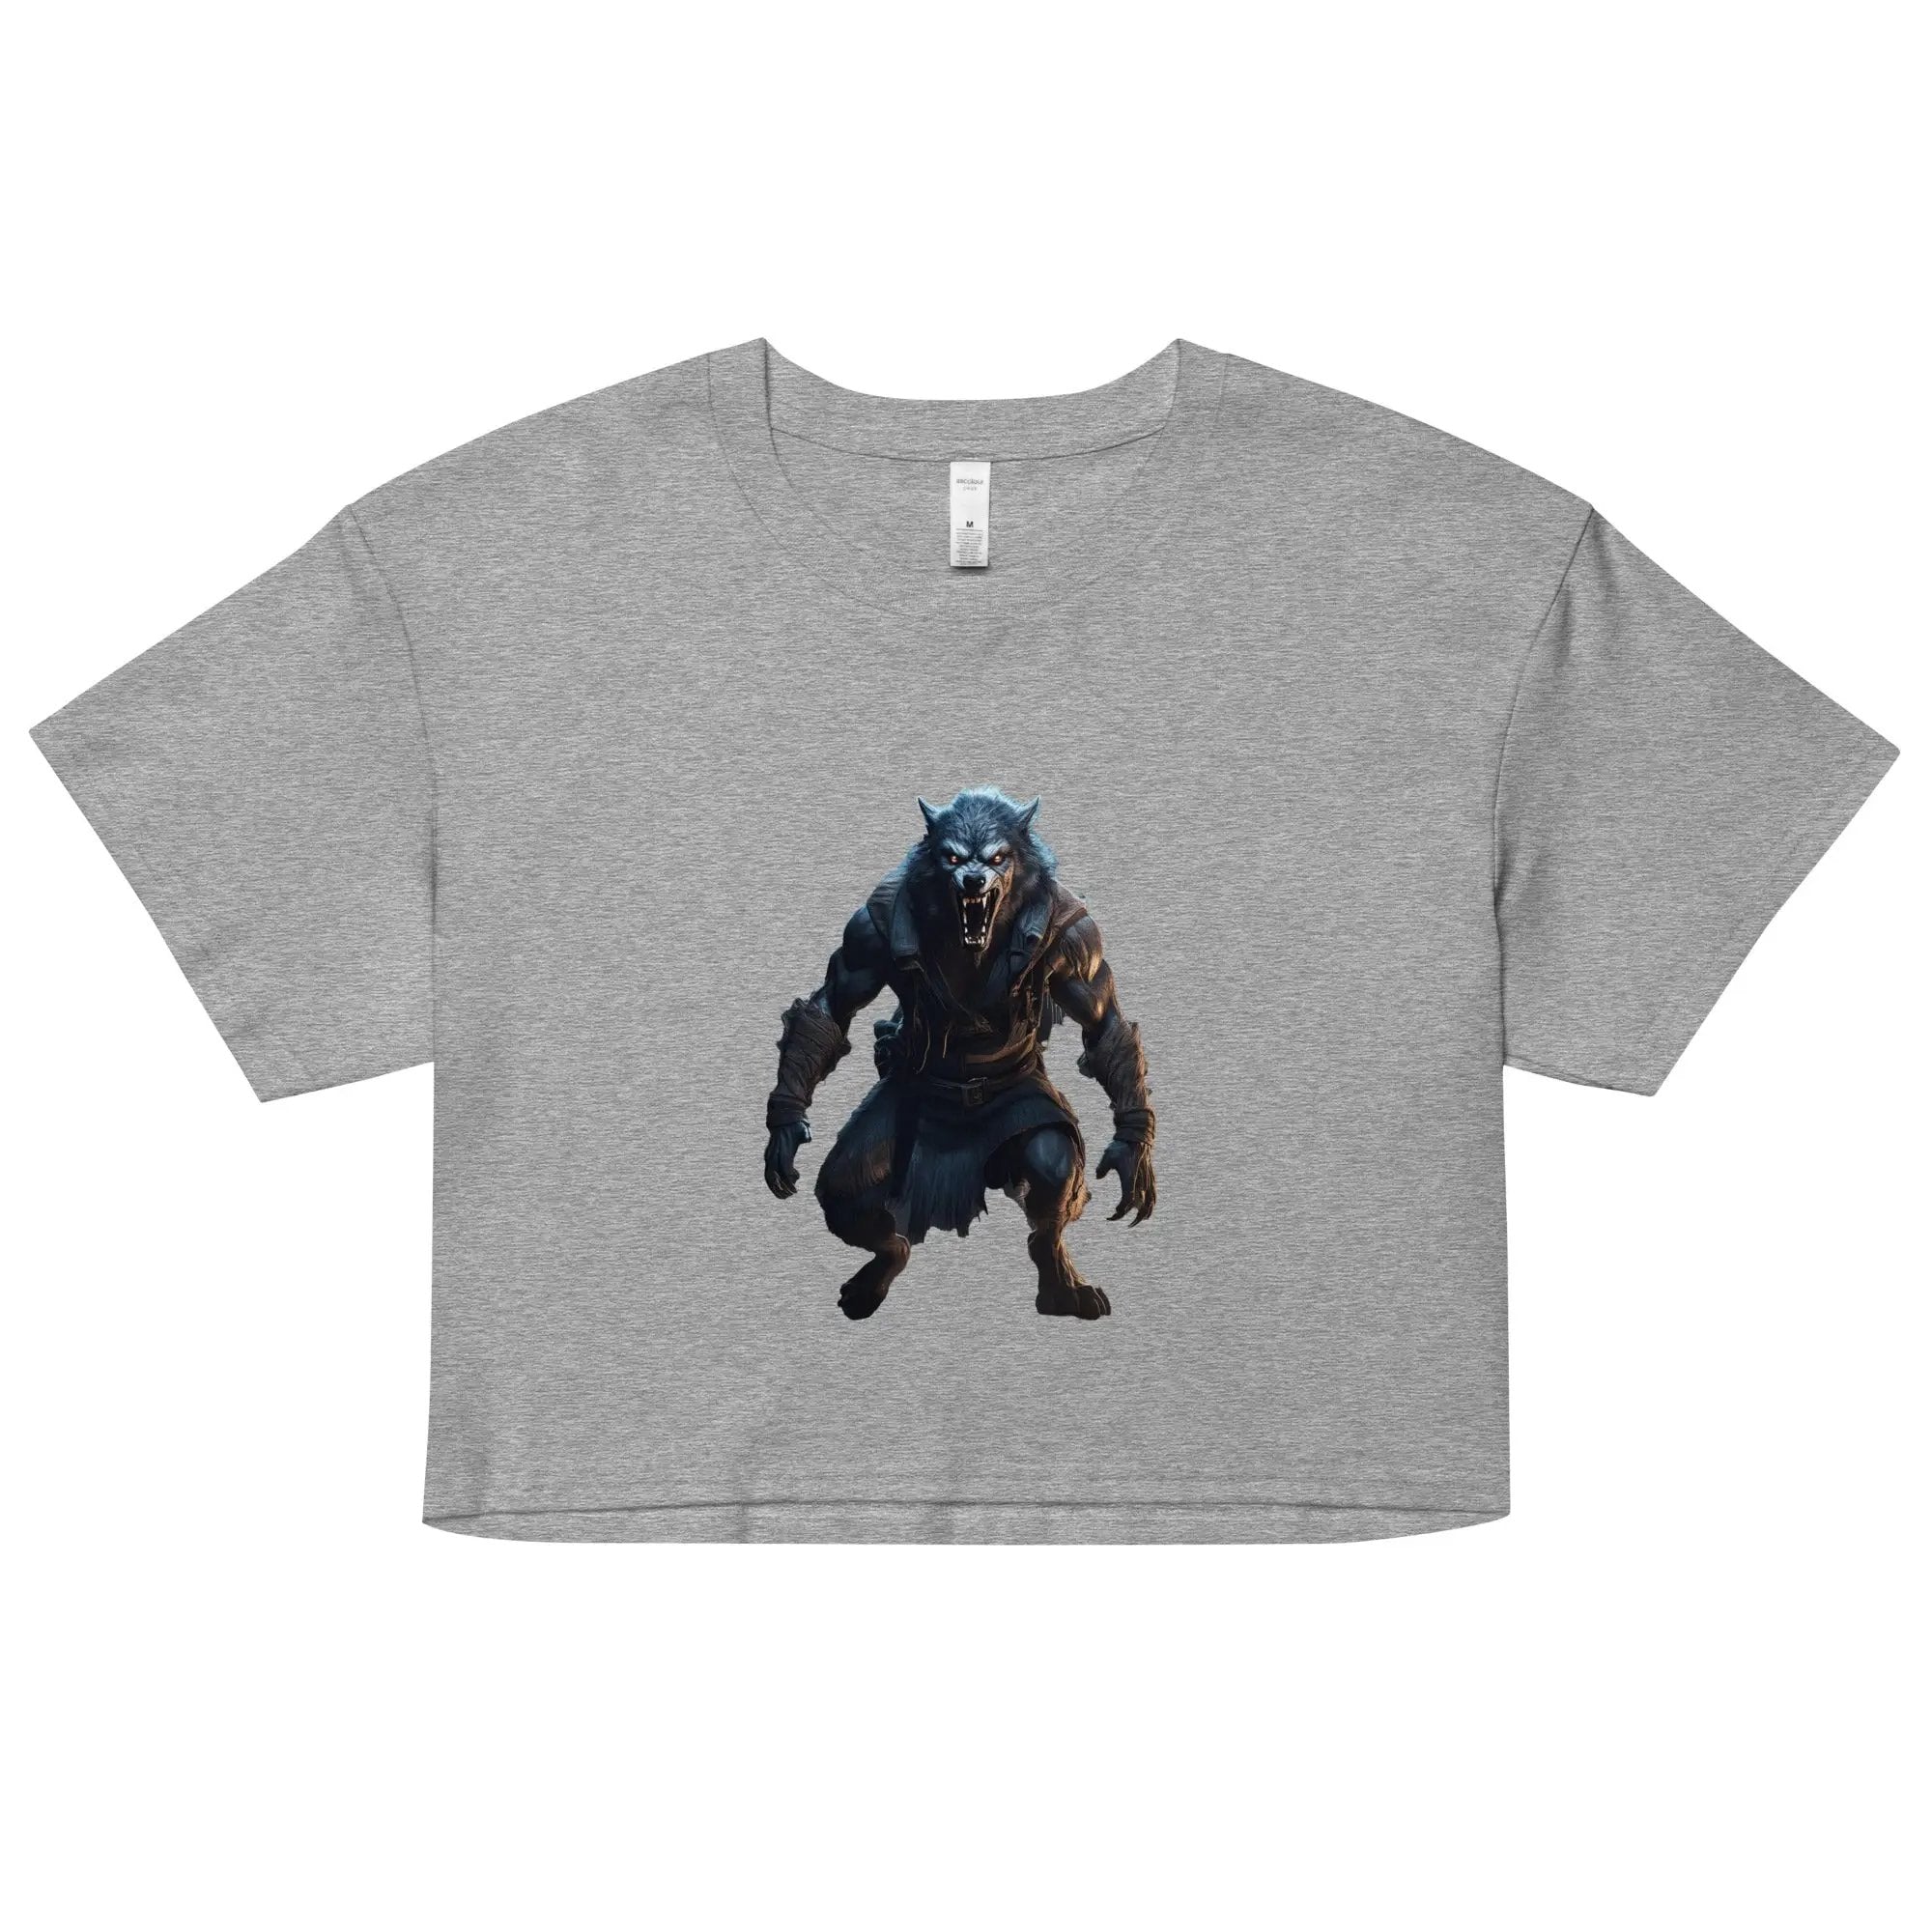 The Monster Squad "Wolfman" Women’s crop top